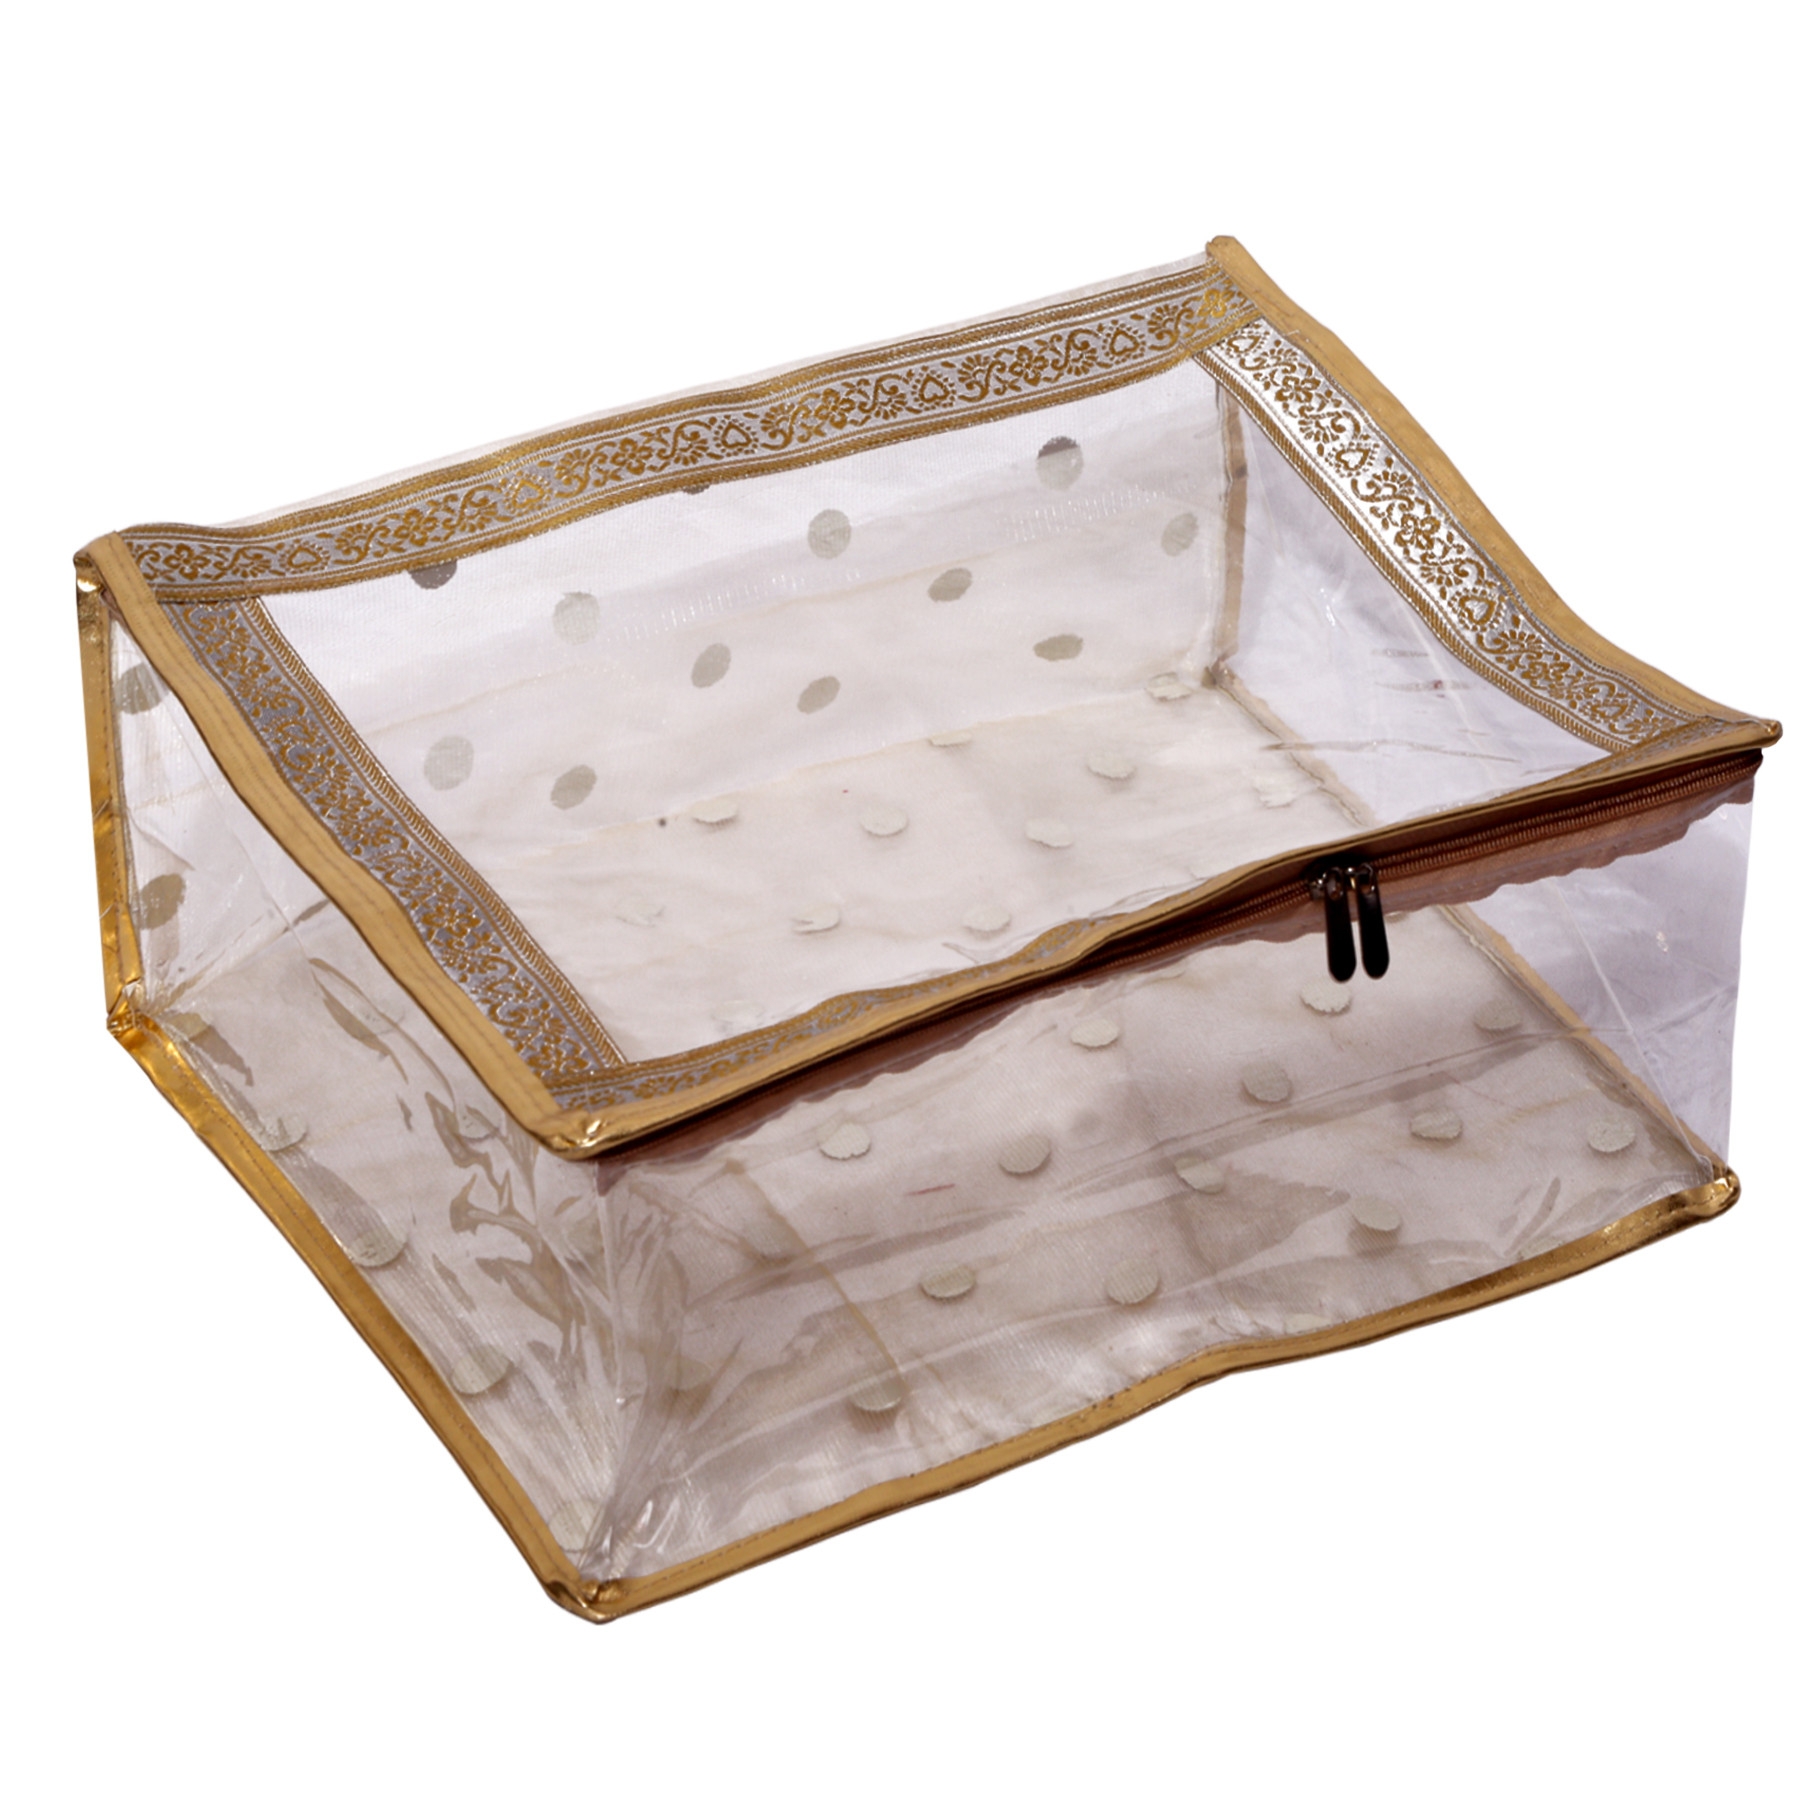 Kuber Industries Dot Printed Transparent PVC Saree Cover/Clothes/Storage Bag Organiser For Wardrobe (Gold)